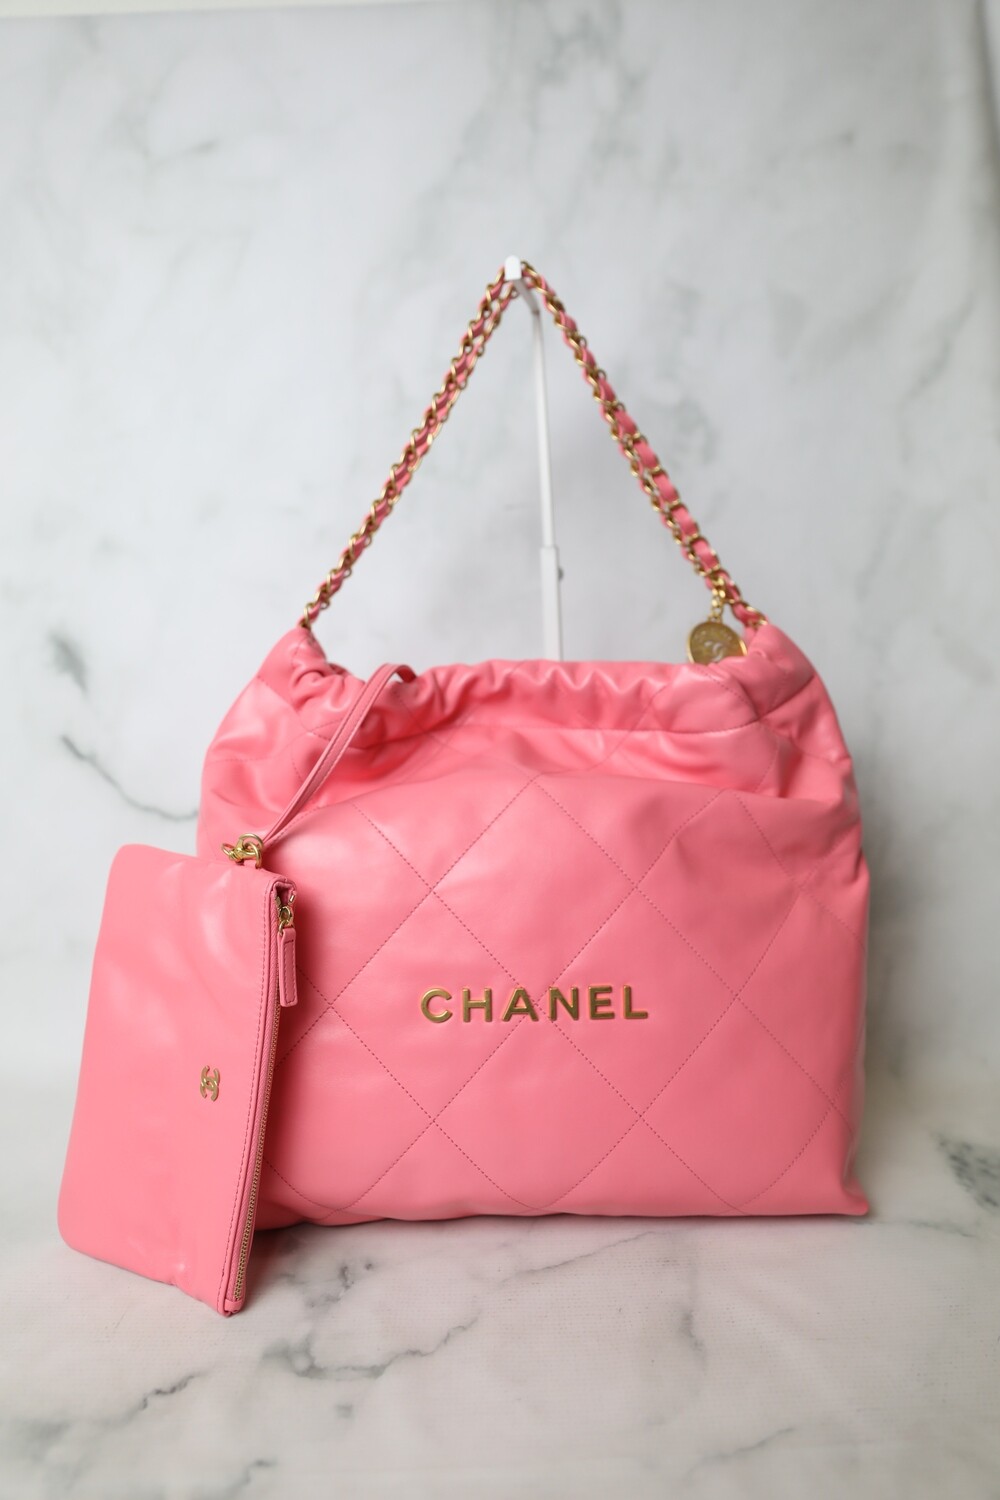 Chanel 22 Small Quilted Hobo Tote, Rose Gold Calfskin with Gold